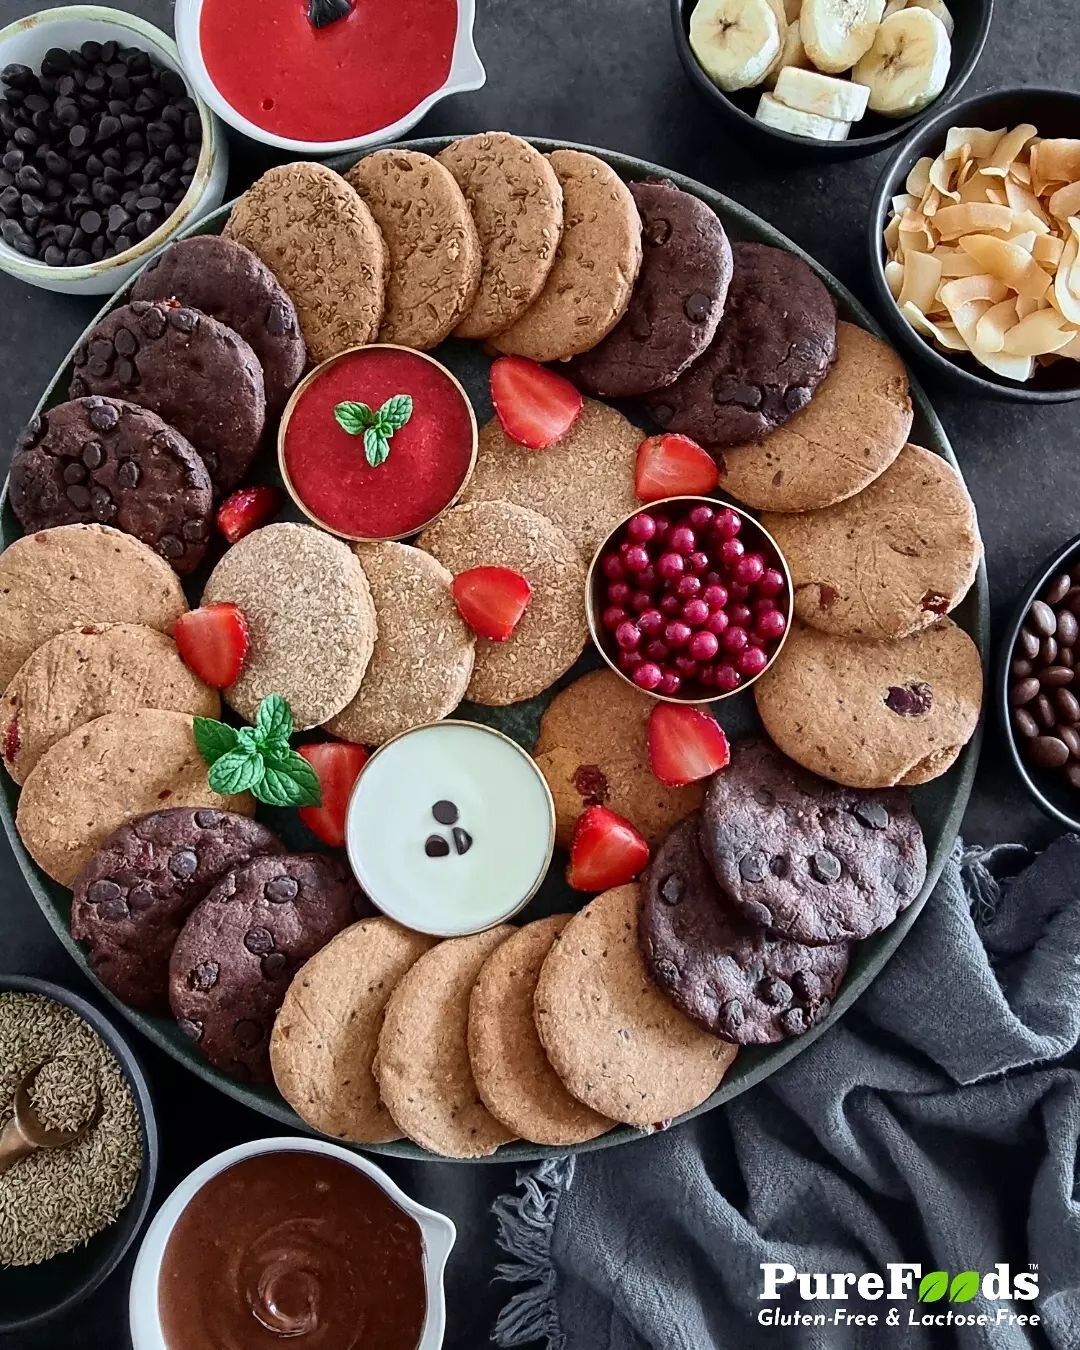 Wishing you all a very Happy Valentine&rsquo;s Day! 

We are celebrating the day of love by indulging in our scrumptious cookies that come in 5 fabulous flavours. We believe that only one bite can make you fall in love with them. Vegan, gluten-free, 